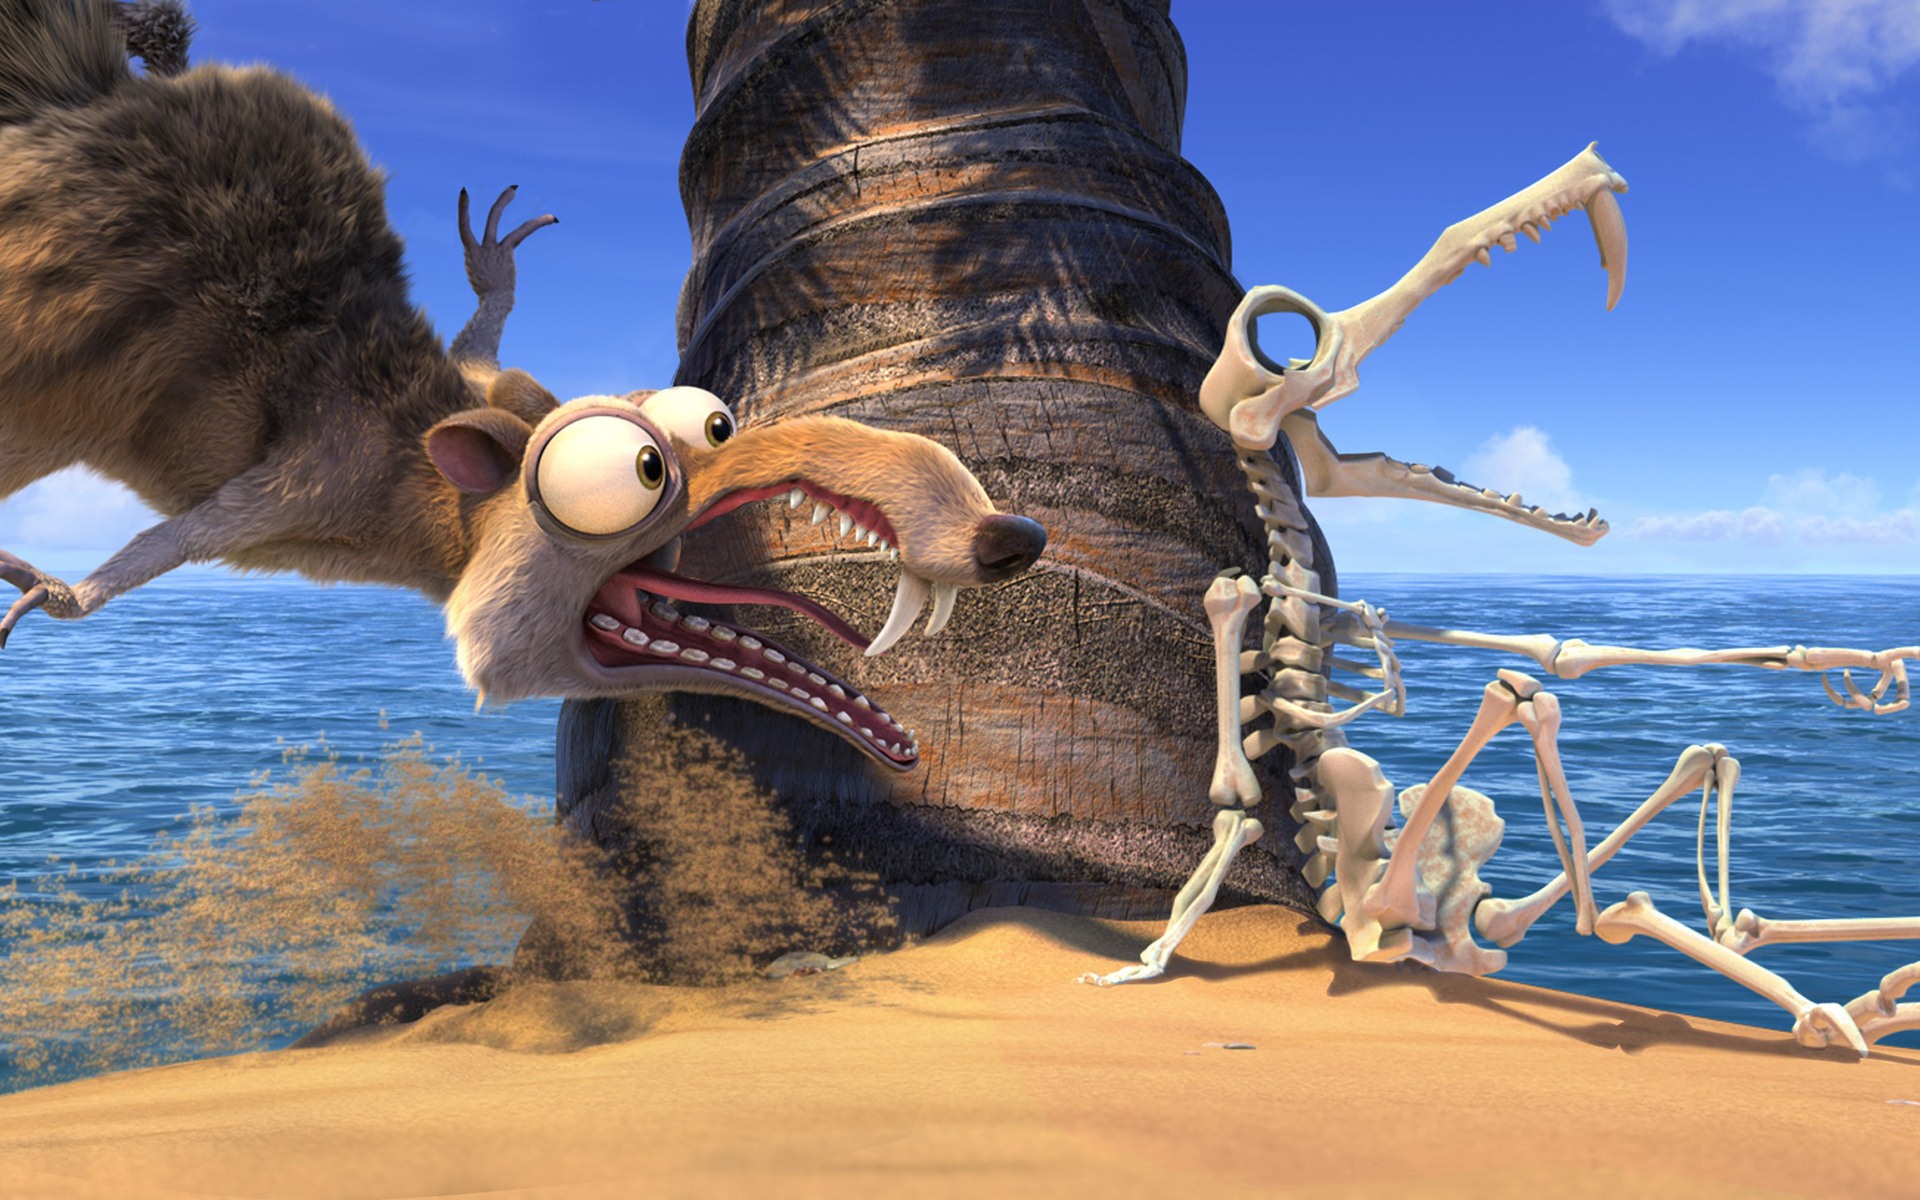 Ice Age: Continental Drift for ios download